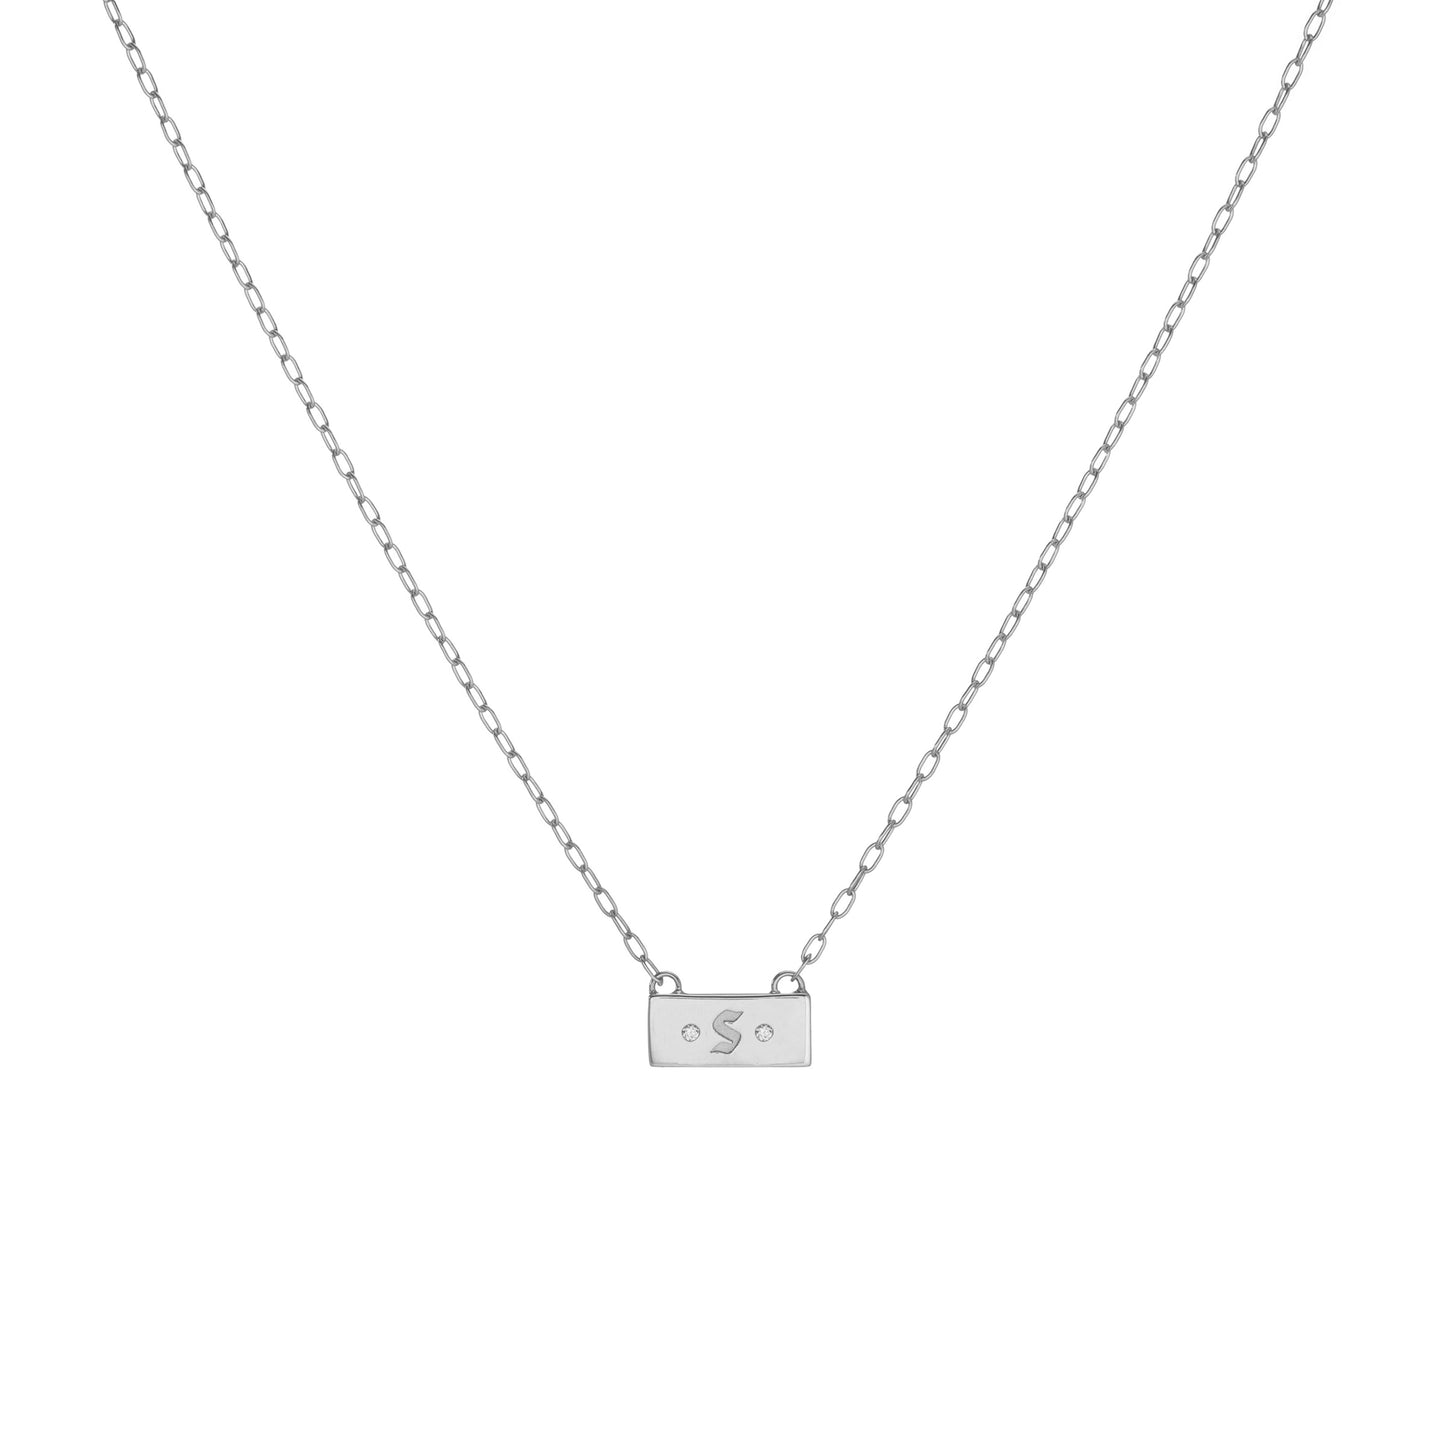 Jennifer Fisher - 1 Gothic Letter and 2 Diamond Pendant Necklace - White Gold